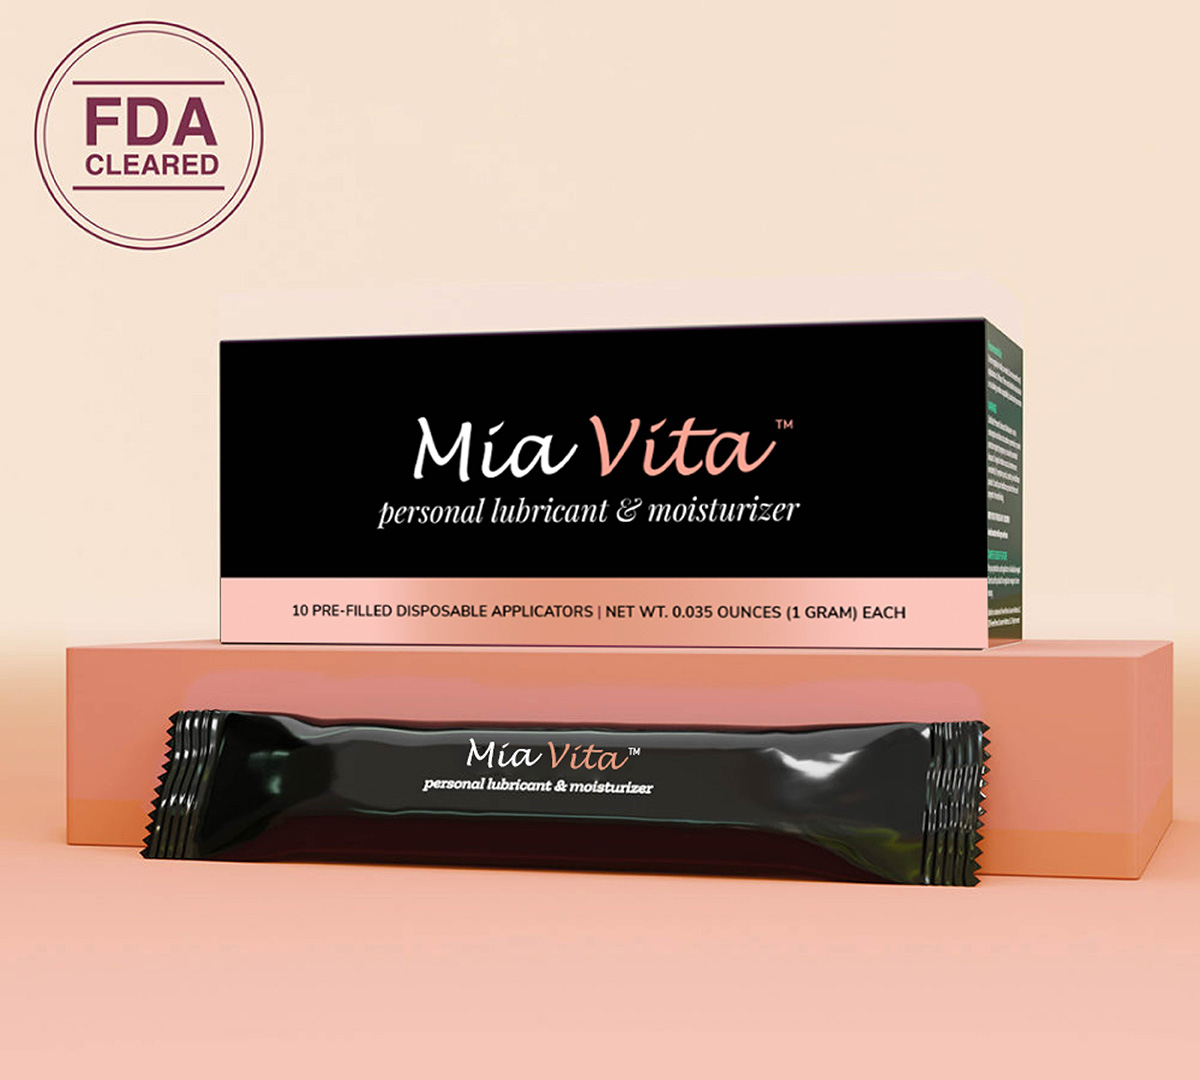 Product image of Mia Vita personal lubricant and moisturizer box and tubes; a seal at the top of the image says 